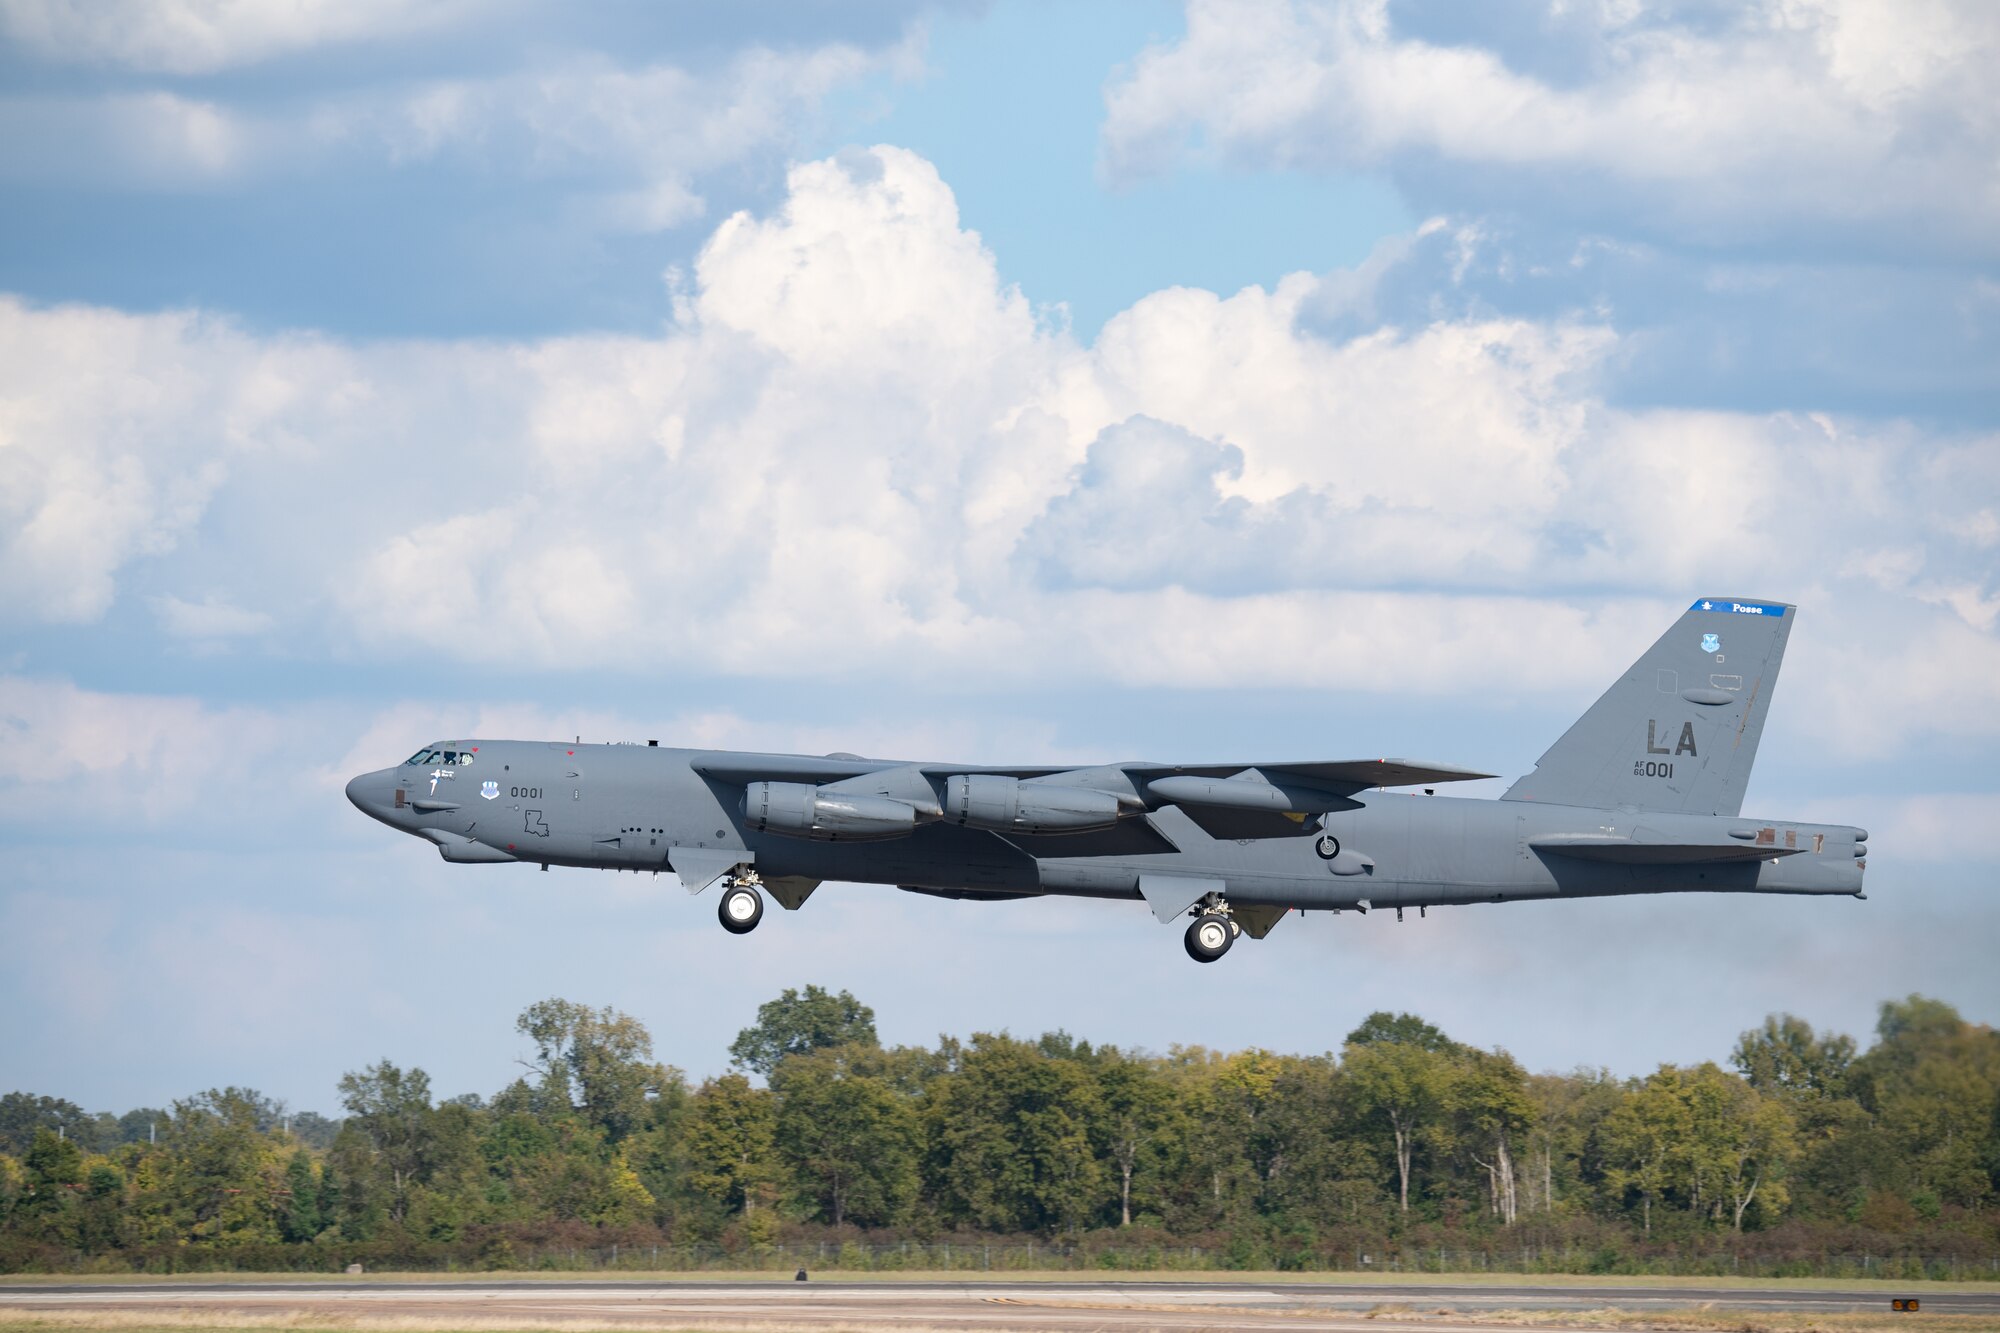 A B-52H Stratofortress takes off from Barksdale Air Force Base, Louisiana, Oct. 21, 2021. Maintenance teams, aircrew, and Airmen across the 2nd Bomb Wing participated in a readiness exercise to showcase nuclear combat capability. (U.S. Air Force photo by Staff Sgt. Christopher Tam)